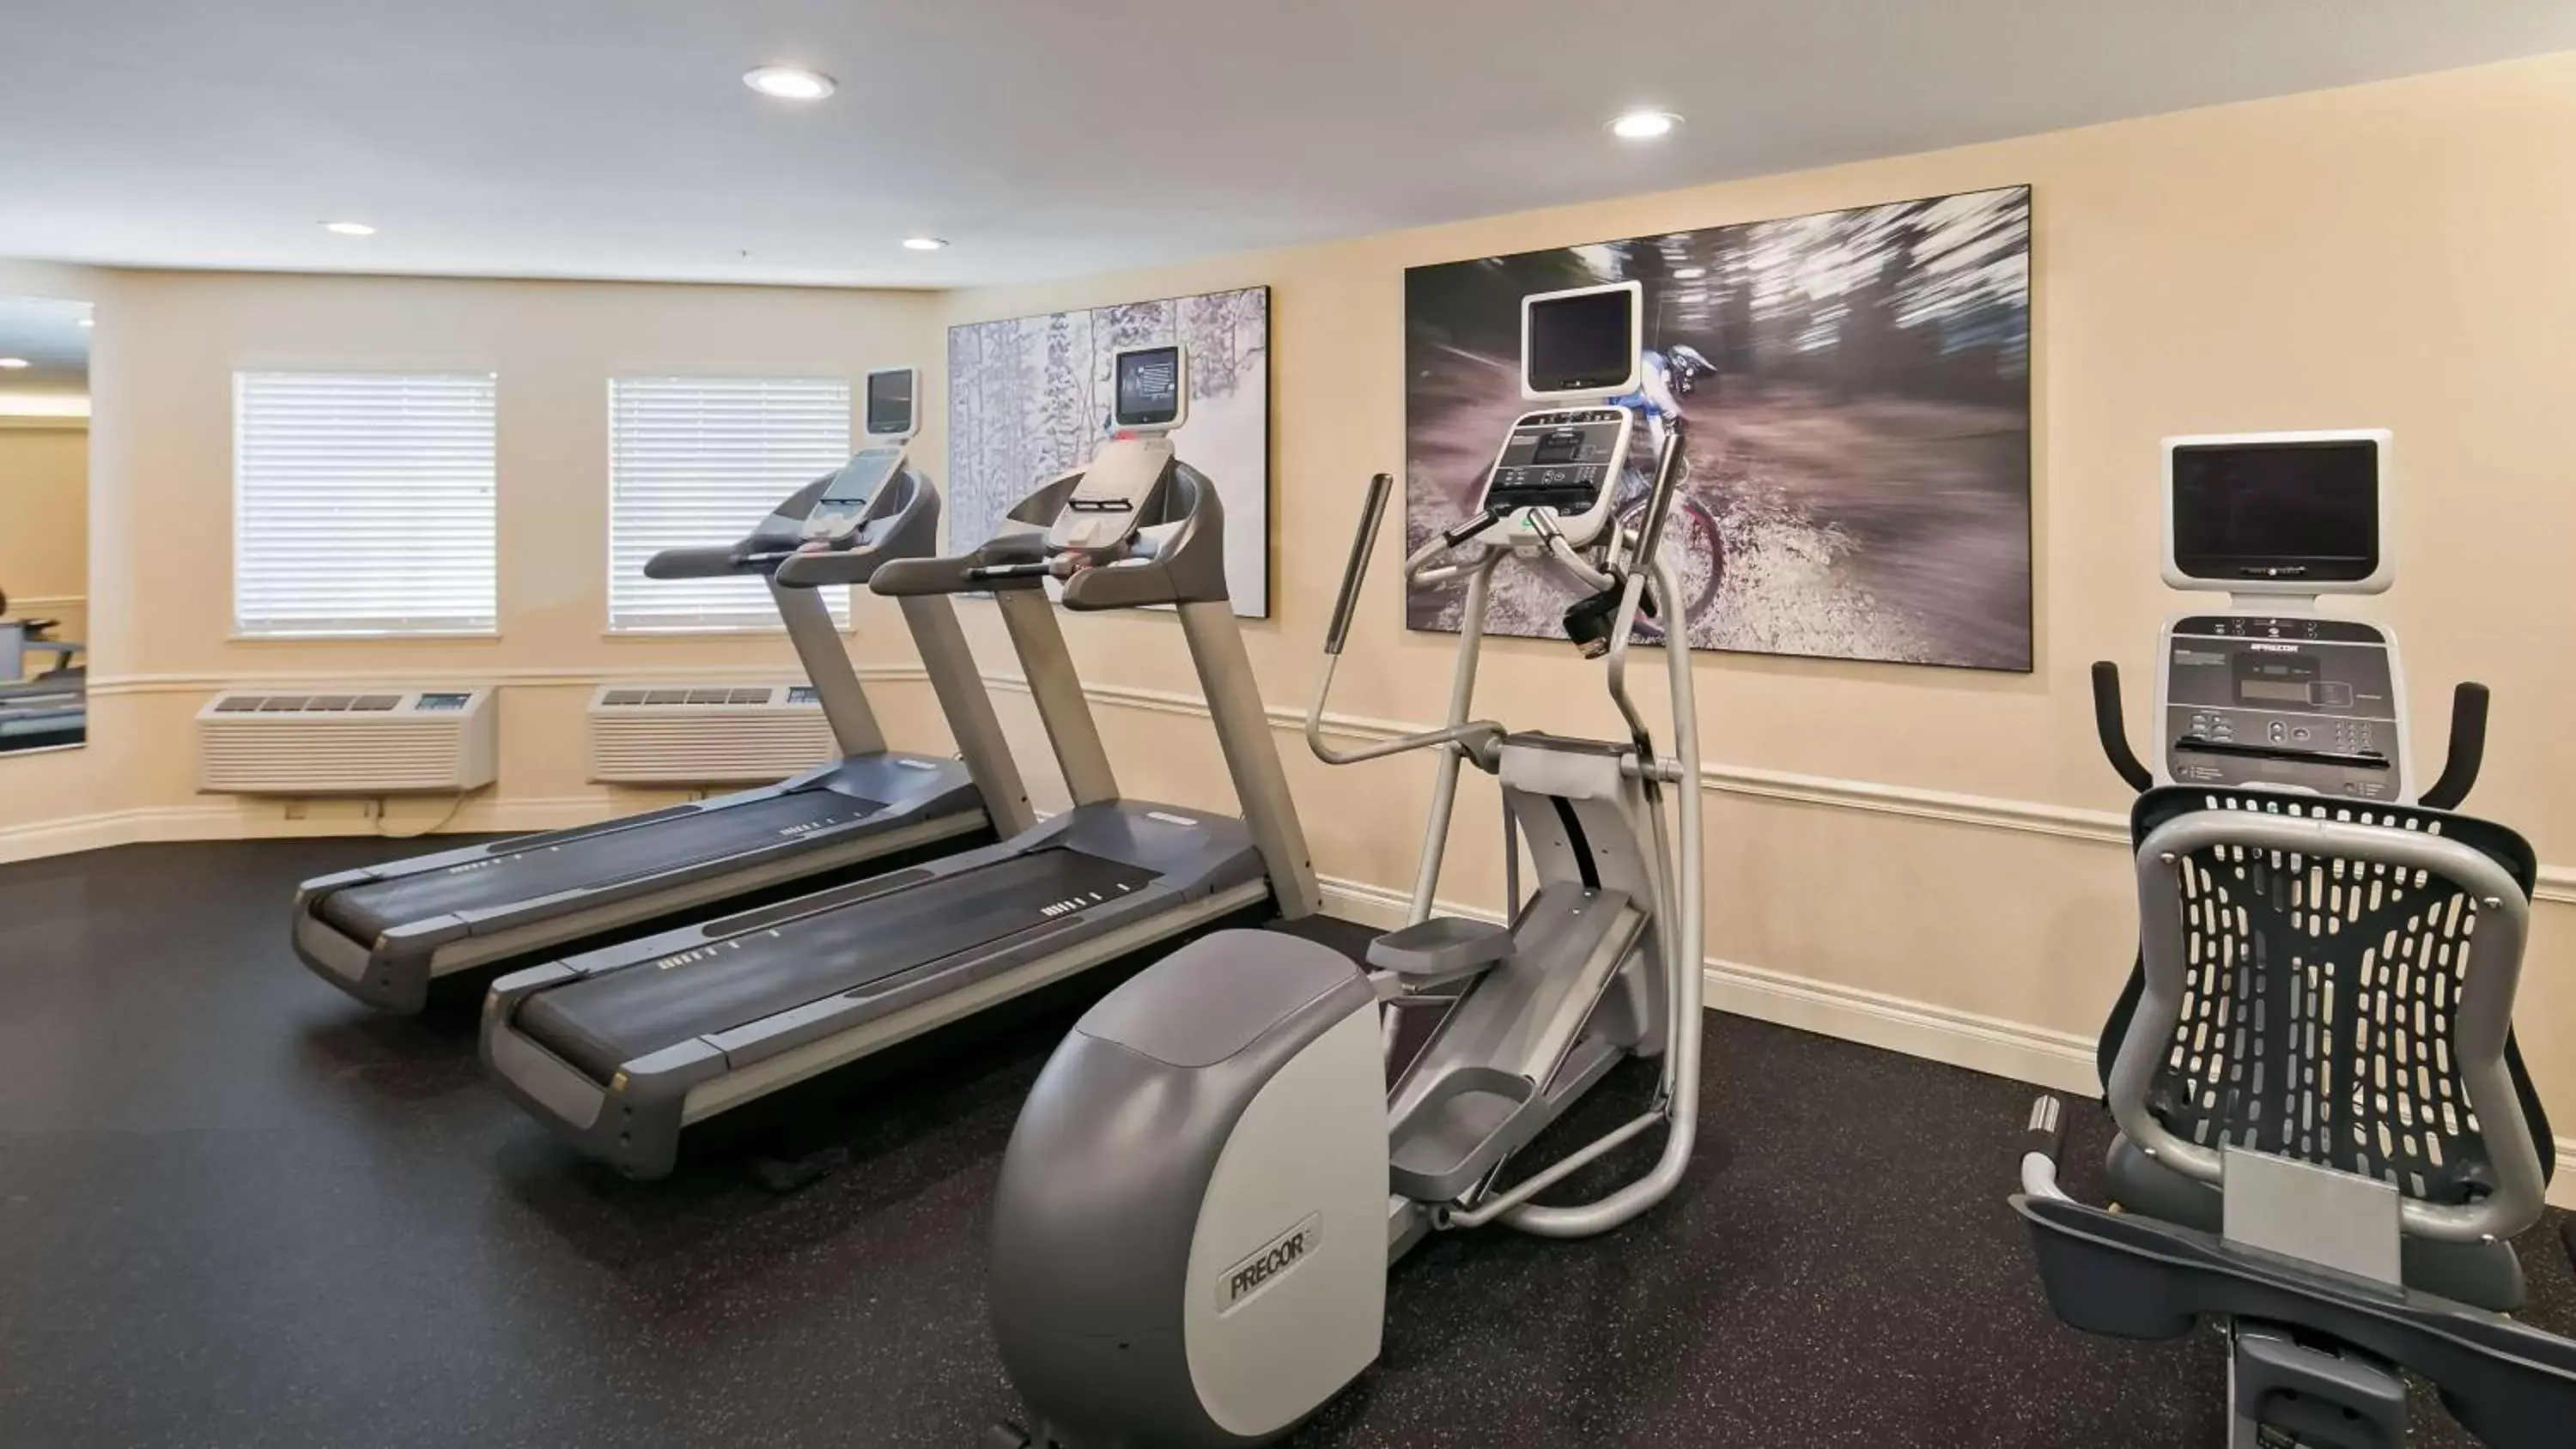 Fitness centre/facilities, Fitness Center/Facilities in Best Western Premier Plaza Hotel and Conference Center